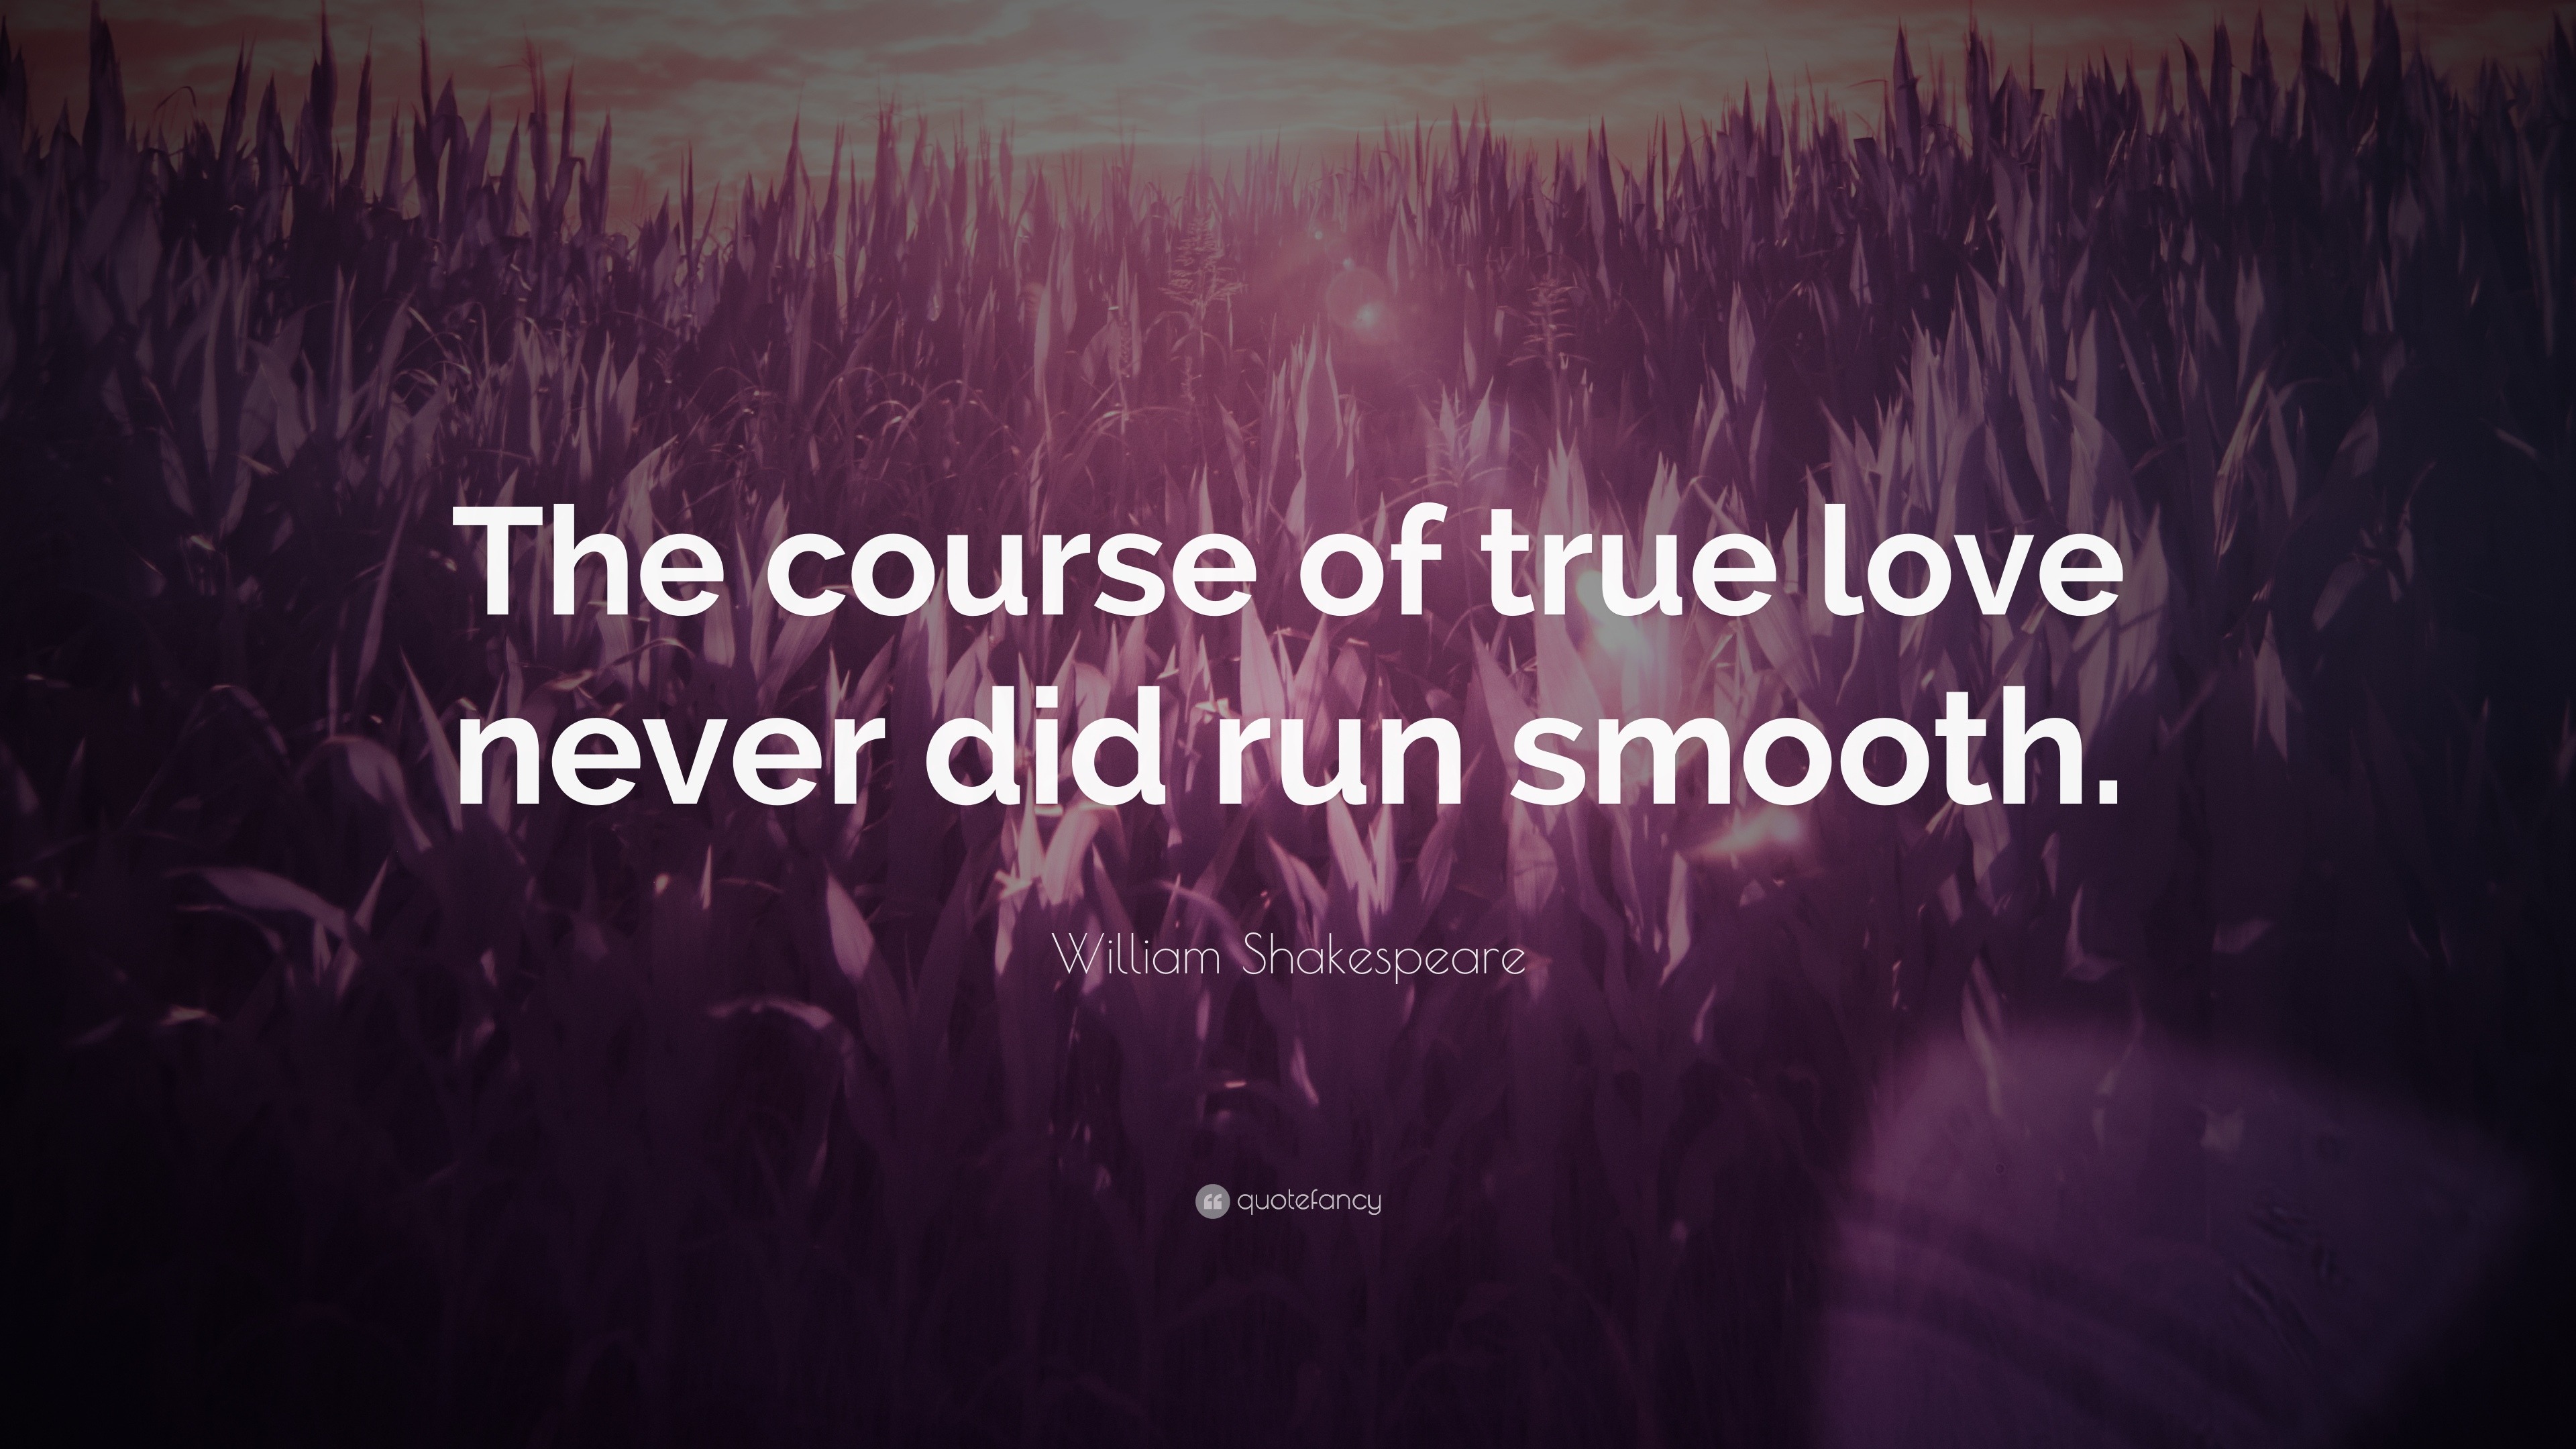 The Course Of True Love In A Midsummer Night's Dream | Bartleby